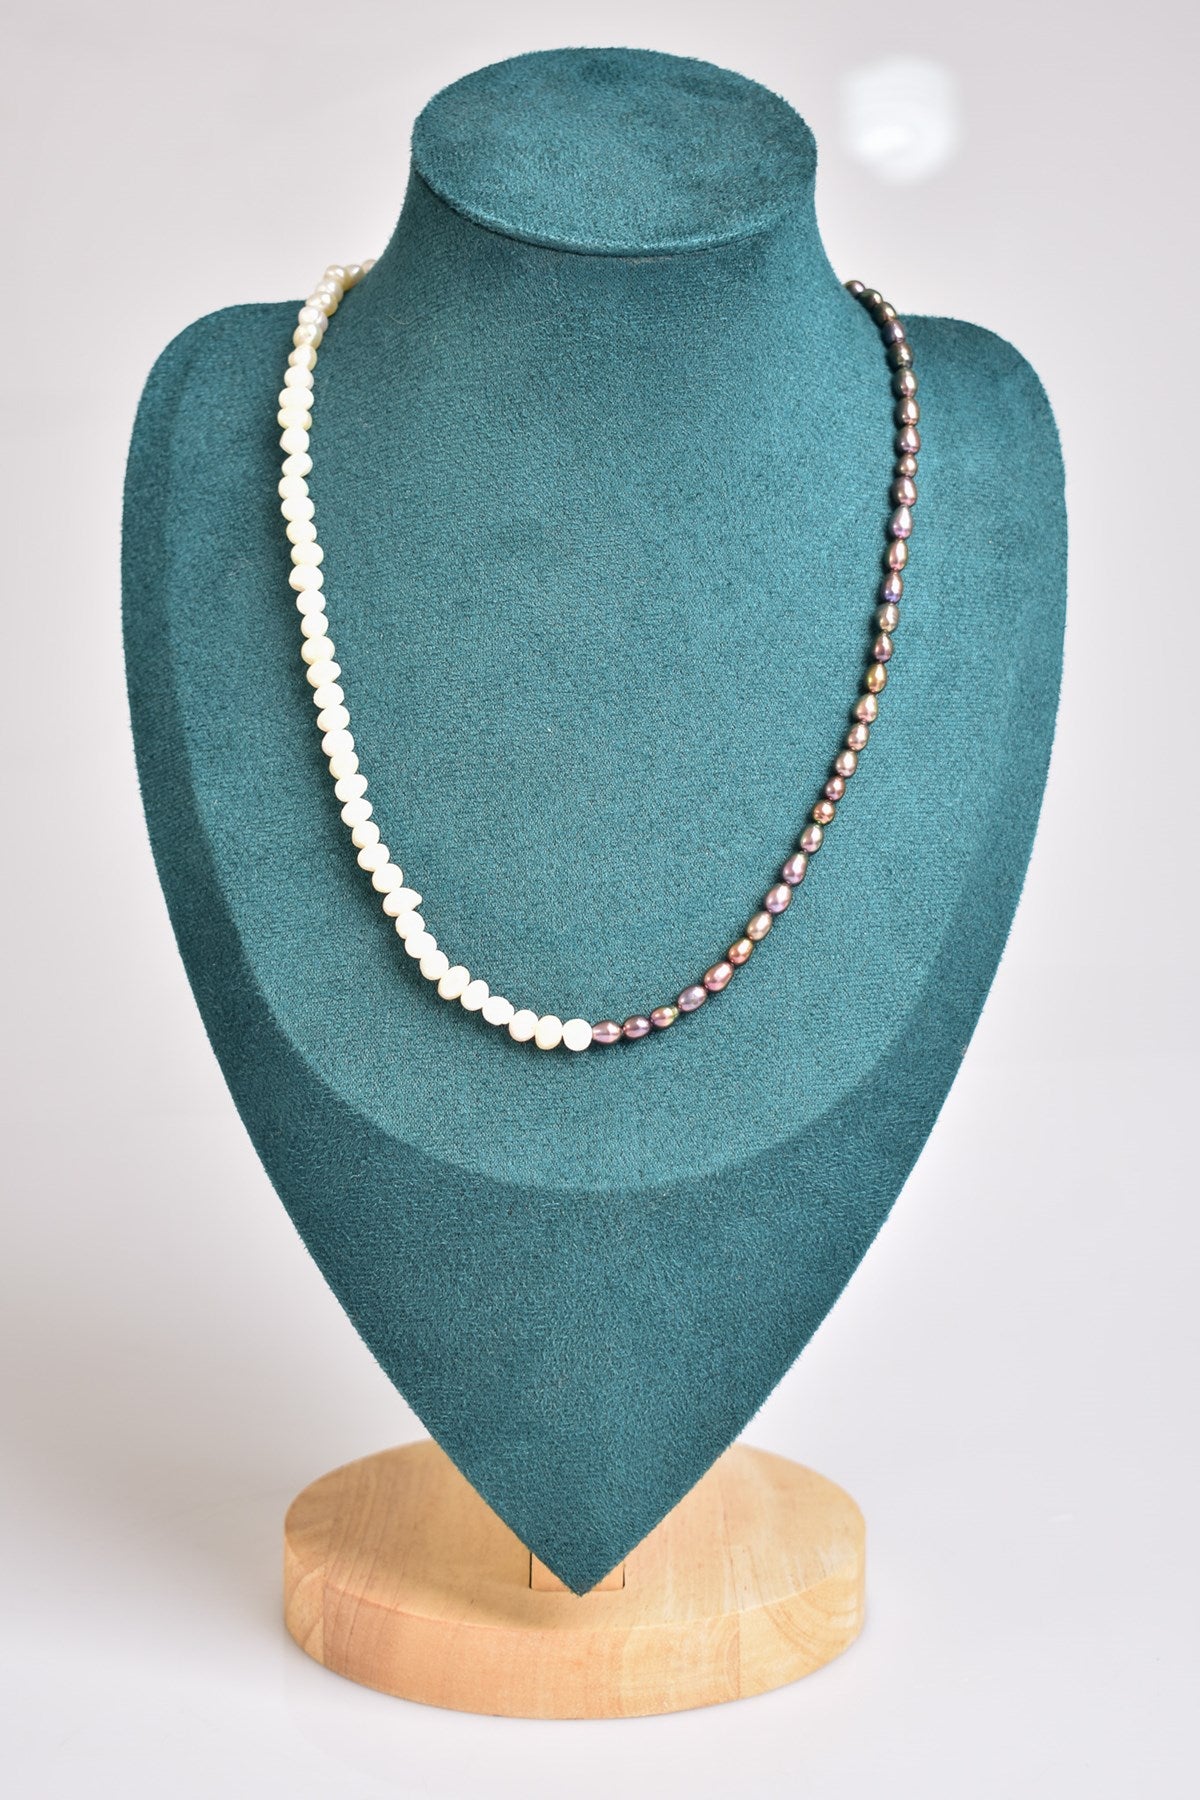 Black / White Ocean Pearl Necklace